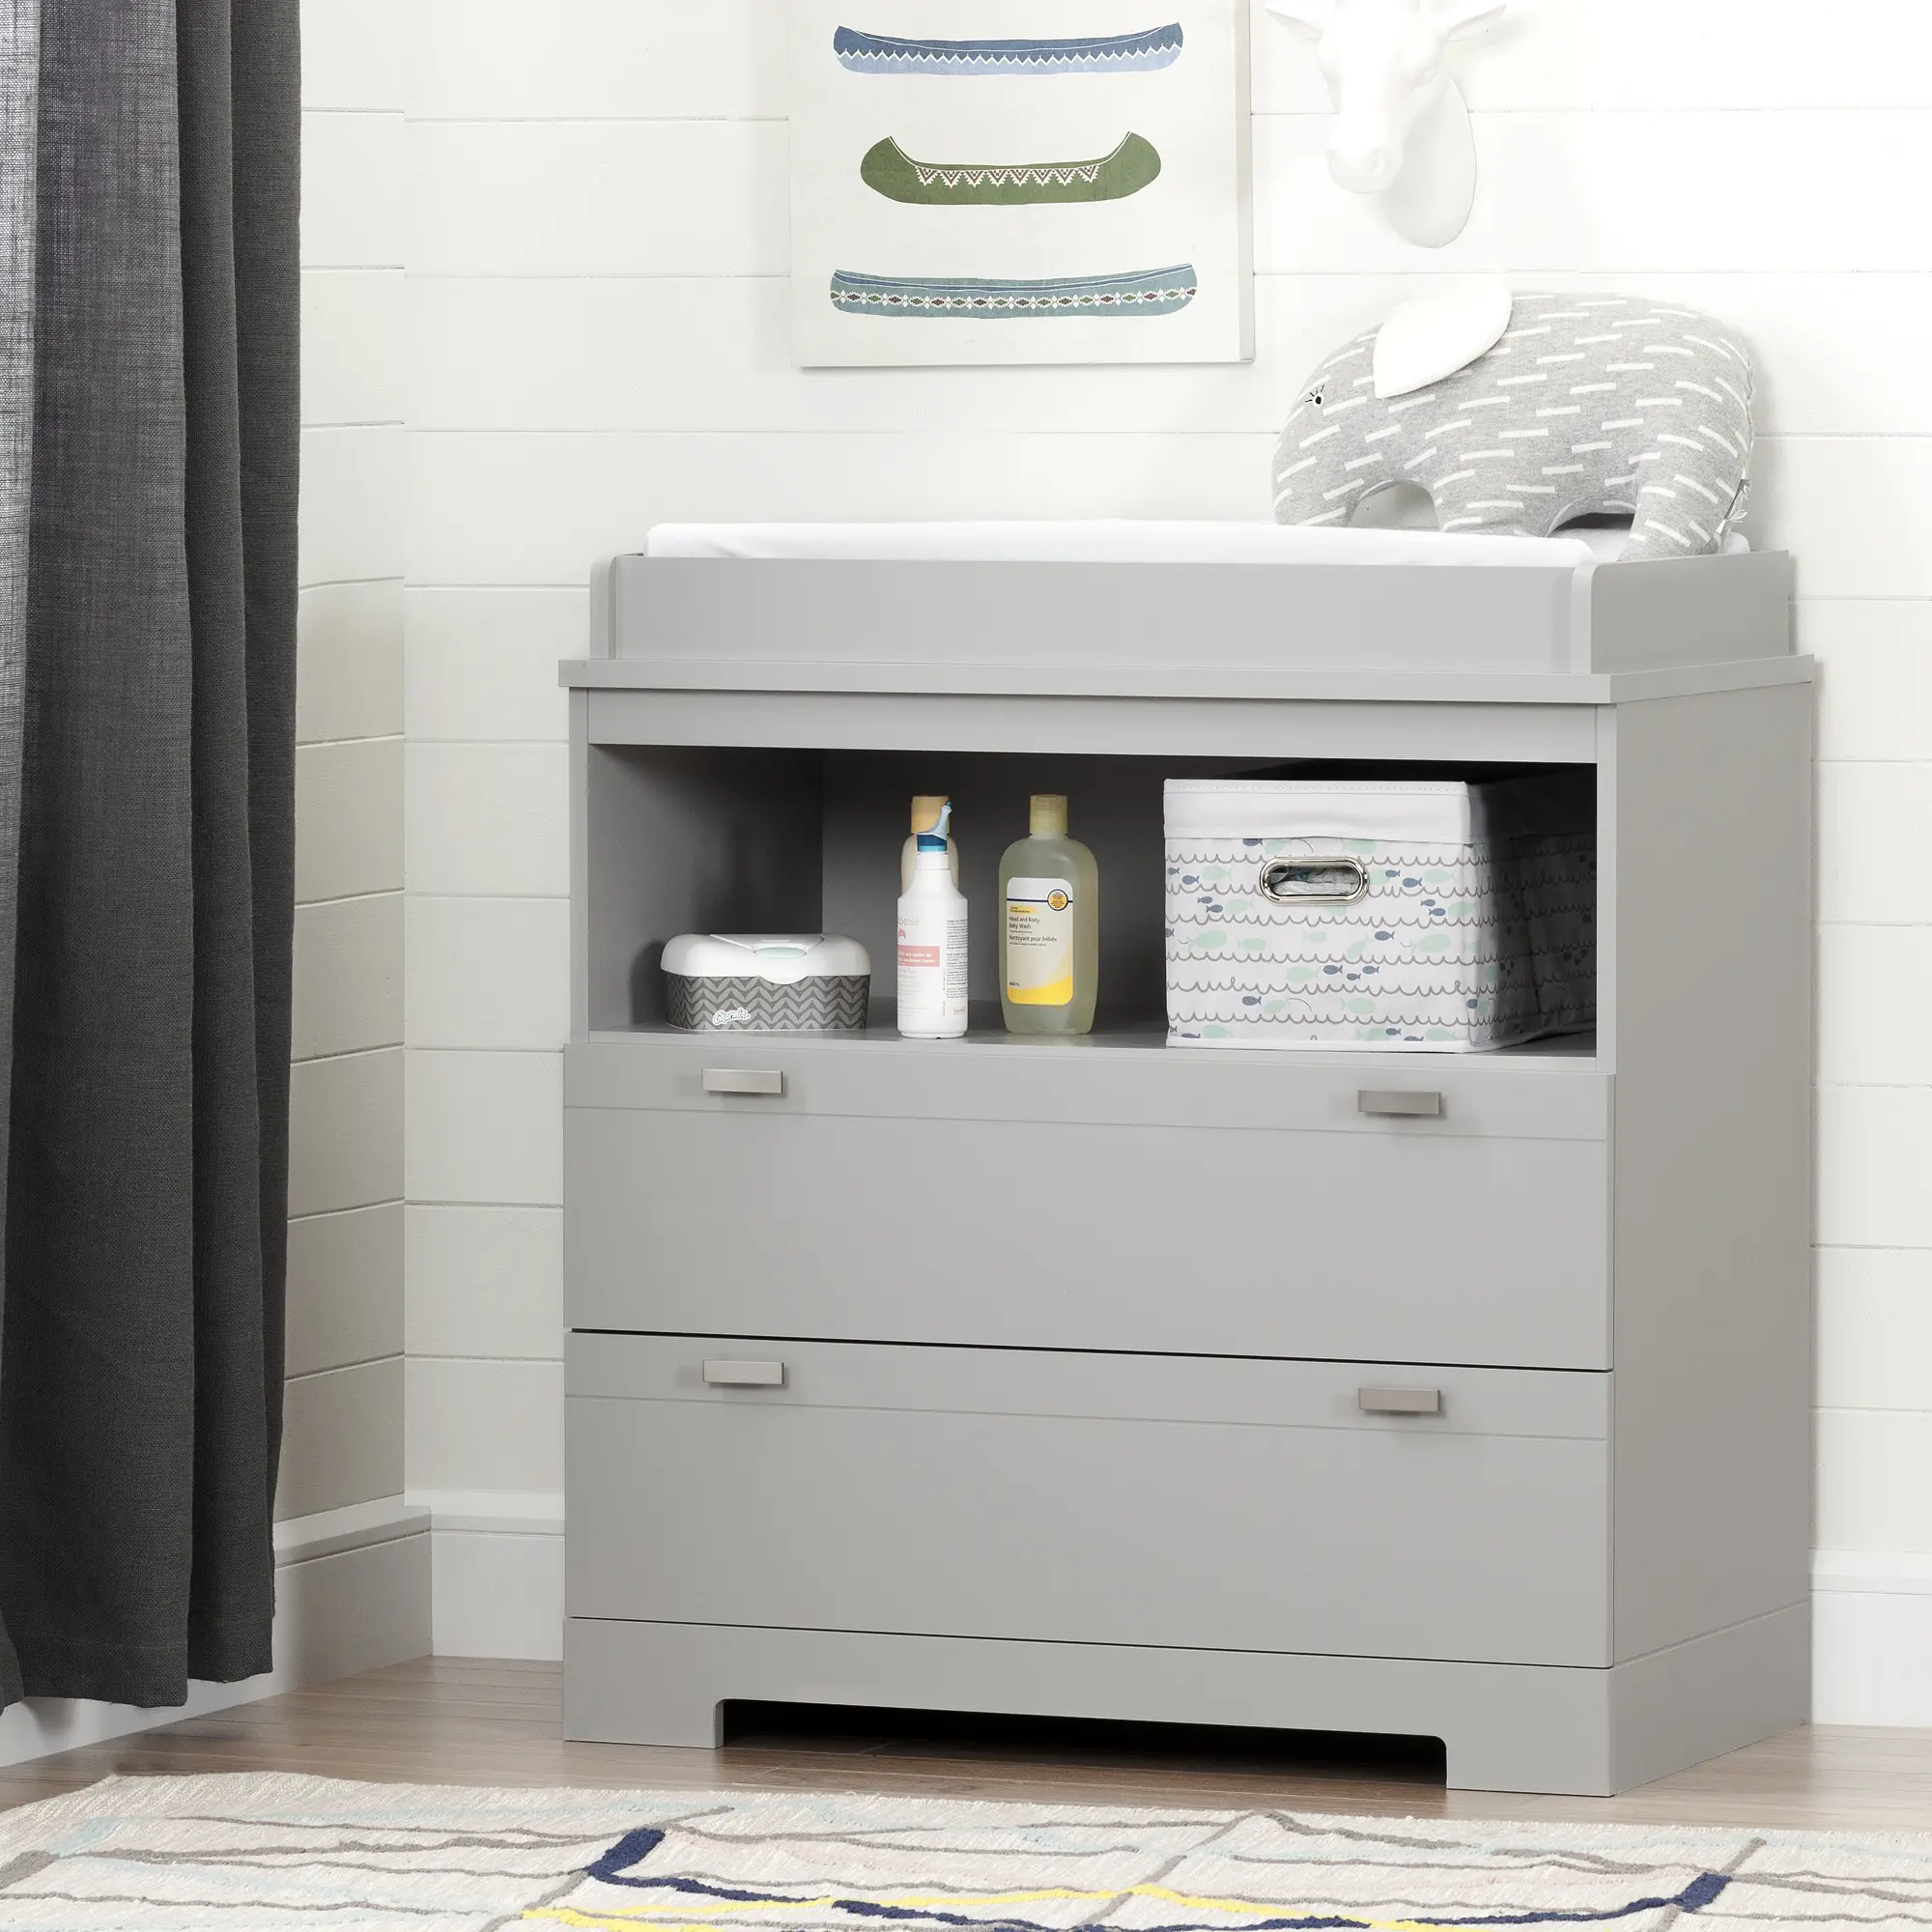 Reevo Gray Changing Table with Storage - South Shore